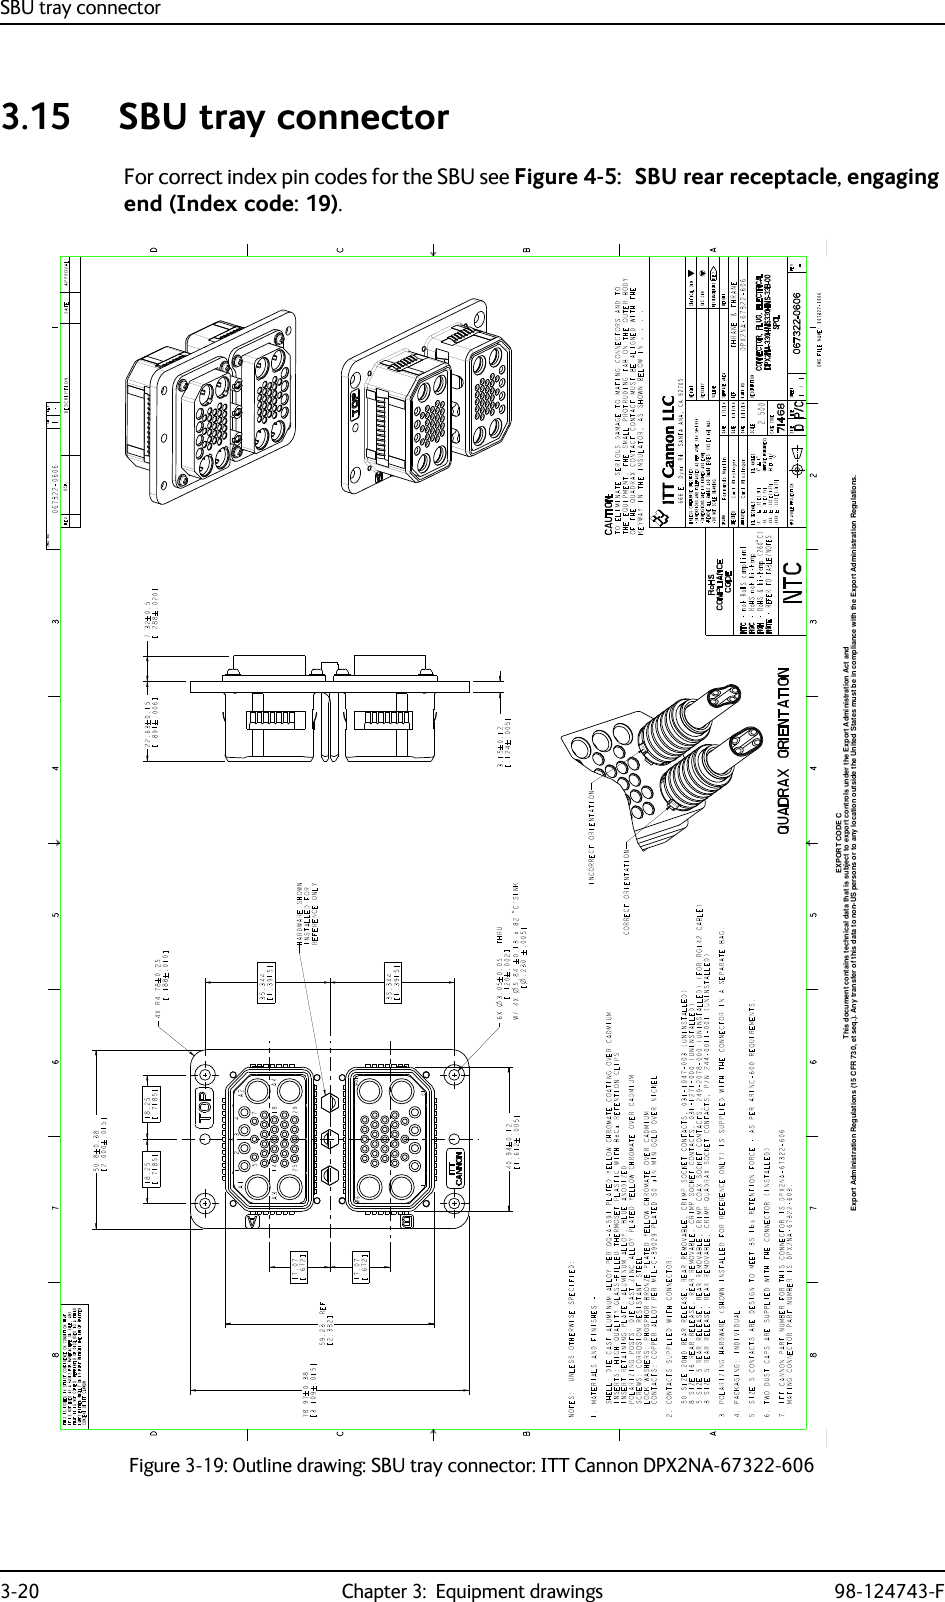 SBU tray connector3-20 Chapter 3:  Equipment drawings 98-124743-F3.15 SBU tray connectorFor correct index pin codes for the SBU see Figure 4-5:  SBU rear receptacle, engaging end (Index code: 19).Figure 3-19: Outline drawing: SBU tray connector: ITT Cannon DPX2NA-67322-606Export Administration Regulations (15 CFR 730, et seq.). Any transfer of this data to non-US persons or to any location outside the United States must be in compliance with the Export Administration Regulations.This document contains technical data that is subject to export controls under the Export Administration Act andEXPORT CODE C